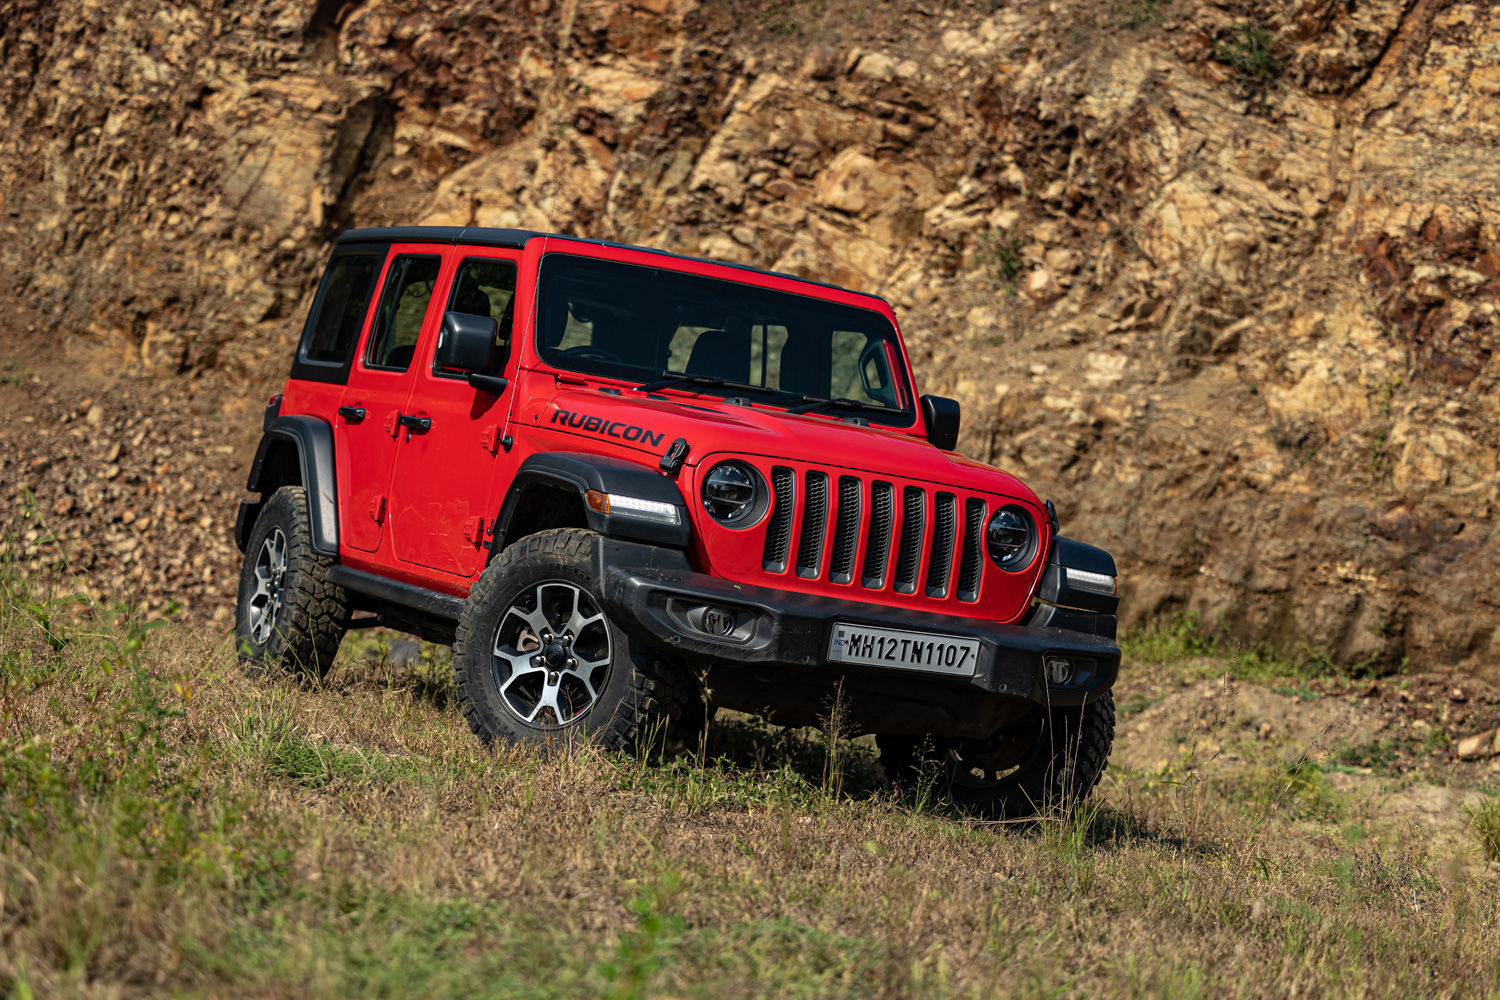 Jeep Wrangler Gets Another Price Hike For 2023, Becomes Dearer By Rs 2 Lakh This October